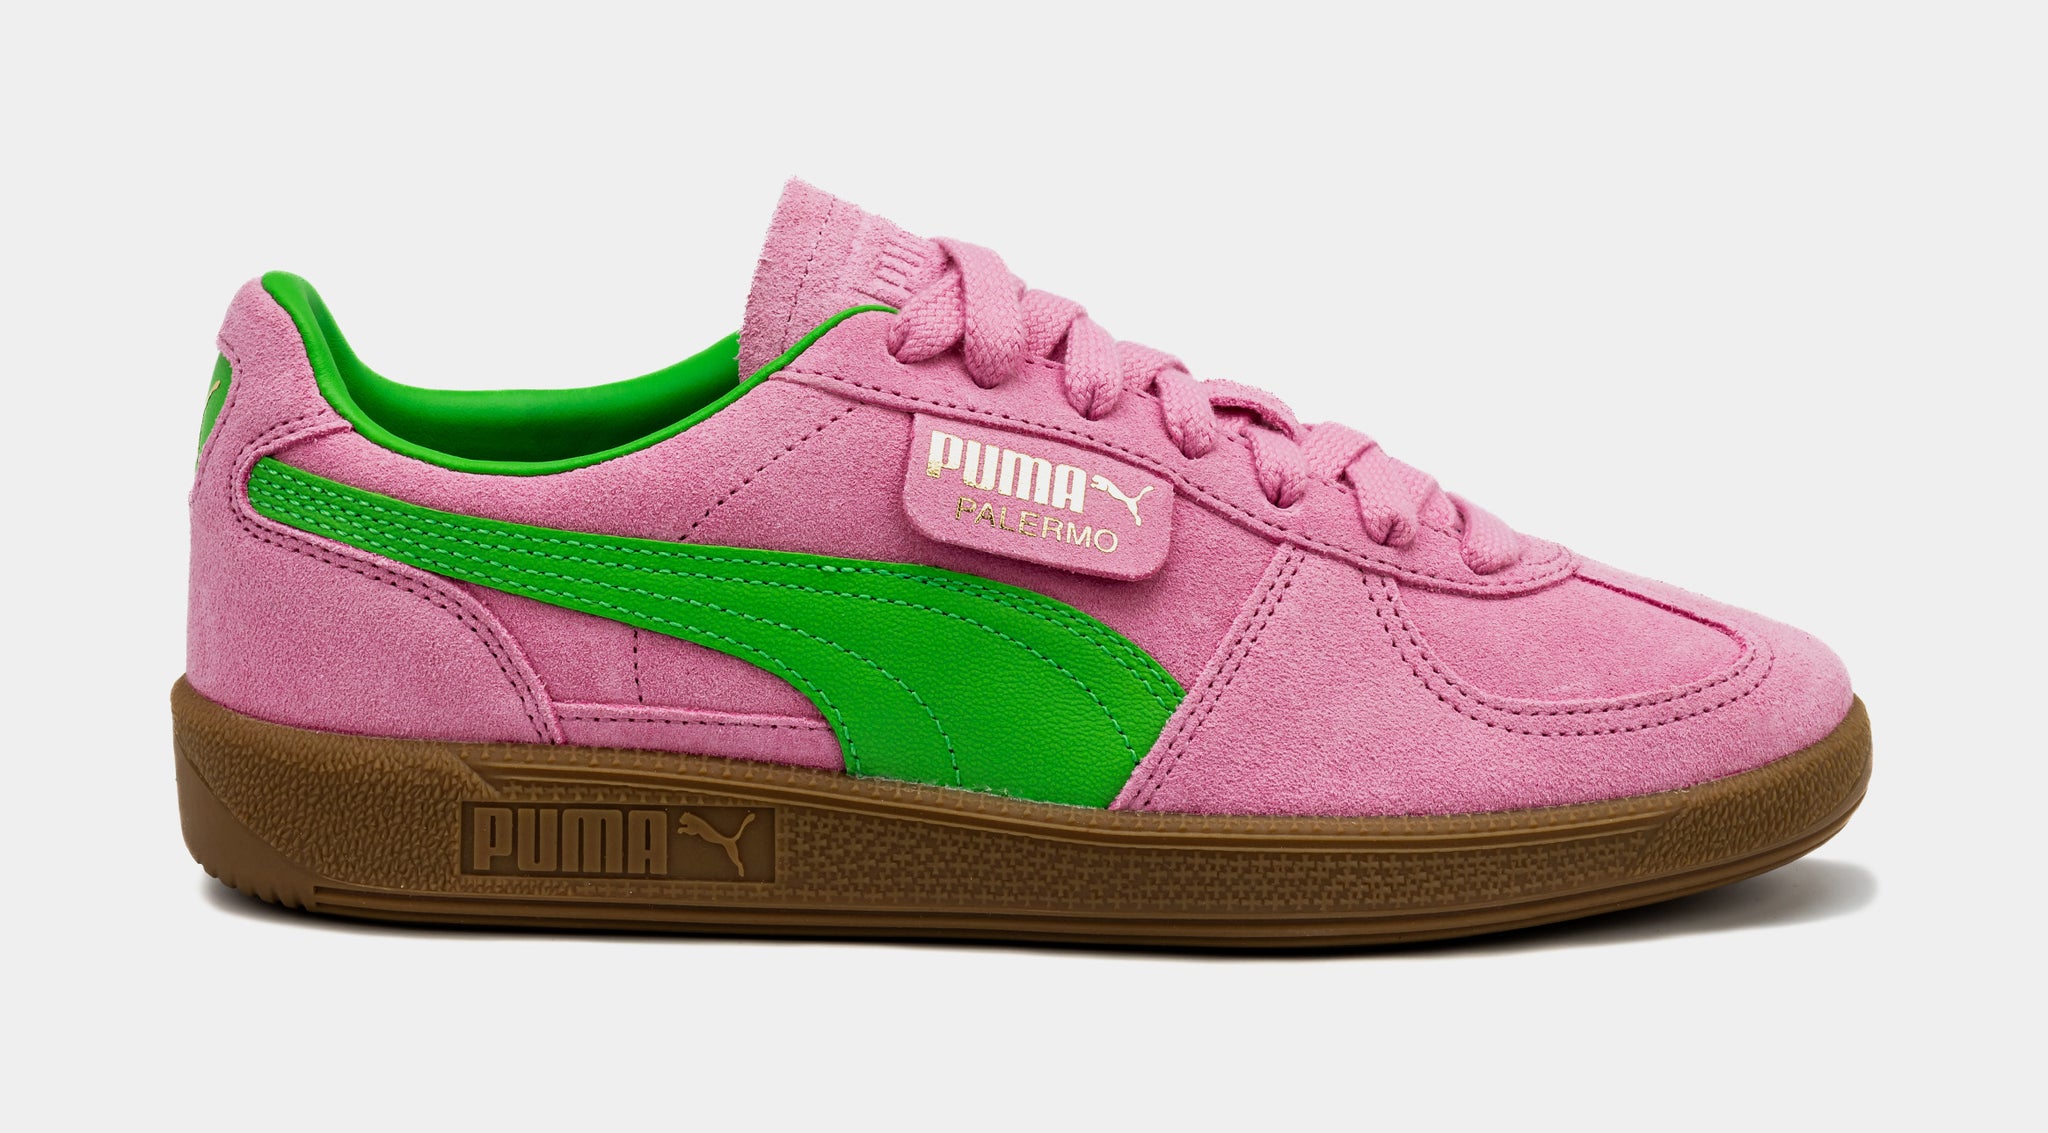 Puma Palermo Special Men's Sneakers, Pink Delight/Green/Gum, 10.5